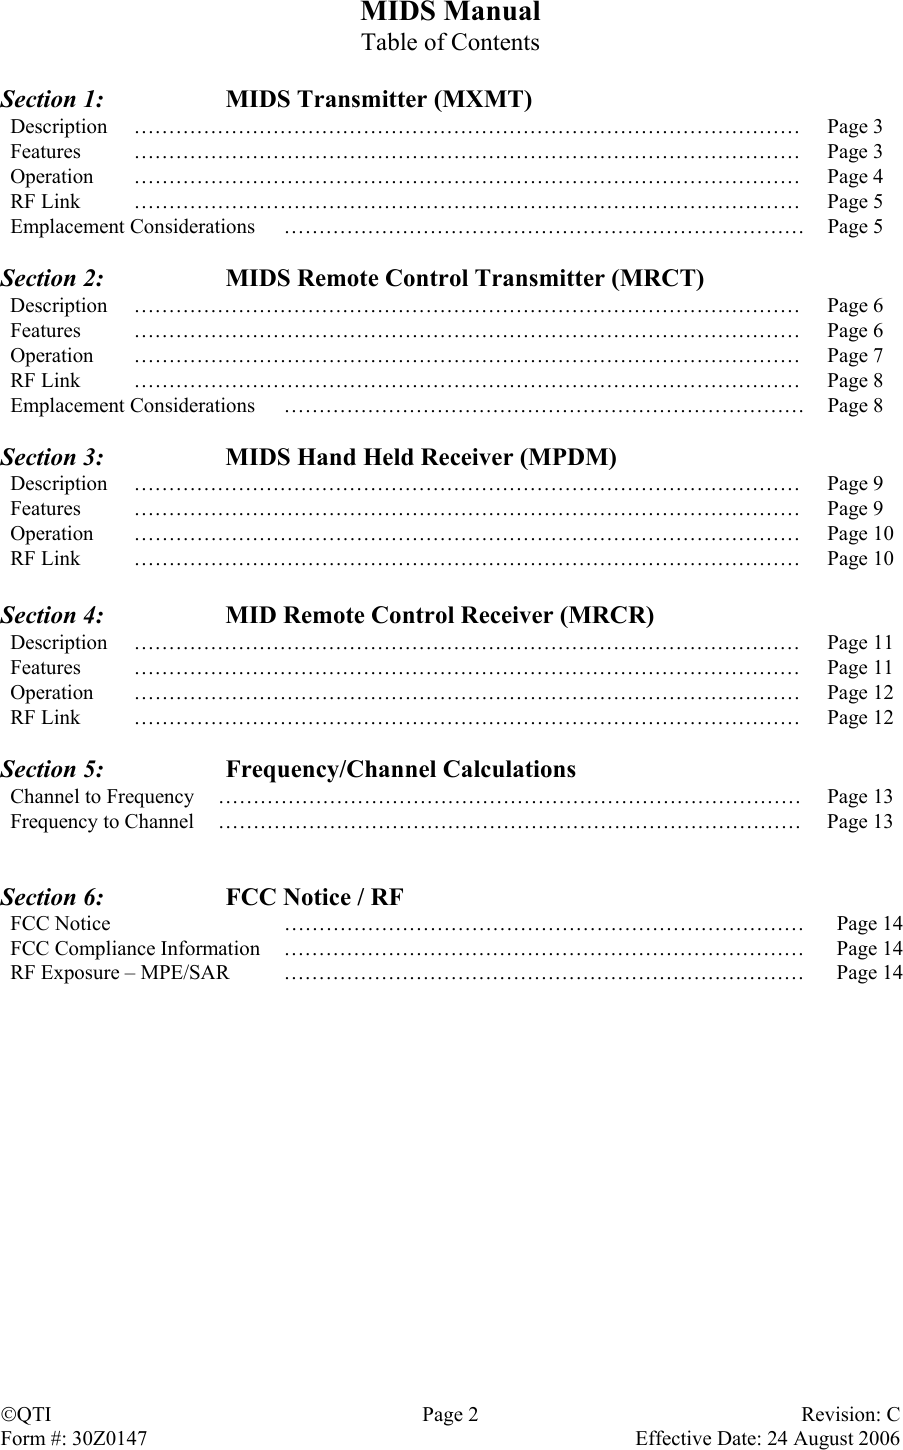 MIDS Manual Table of Contents  Section 1:    MIDS Transmitter (MXMT) Description …………………………………………………………………………………… Page 3 Features …………………………………………………………………………………… Page 3 Operation …………………………………………………………………………………… Page 4 RF Link  ……………………………………………………………………………………  Page 5 Emplacement Considerations  …………………………………………………………………  Page 5  Section 2:    MIDS Remote Control Transmitter (MRCT) Description …………………………………………………………………………………… Page 6 Features …………………………………………………………………………………… Page 6 Operation …………………………………………………………………………………… Page 7 RF Link  ……………………………………………………………………………………  Page 8 Emplacement Considerations  …………………………………………………………………  Page 8  Section 3:    MIDS Hand Held Receiver (MPDM) Description …………………………………………………………………………………… Page 9 Features …………………………………………………………………………………… Page 9 Operation …………………………………………………………………………………… Page 10 RF Link  ……………………………………………………………………………………  Page 10  Section 4:    MID Remote Control Receiver (MRCR) Description …………………………………………………………………………………… Page 11 Features …………………………………………………………………………………… Page 11 Operation …………………………………………………………………………………… Page 12 RF Link  ……………………………………………………………………………………  Page 12  Section 5:   Frequency/Channel Calculations Channel to Frequency  …………………………………………………………………………  Page 13 Frequency to Channel  …………………………………………………………………………  Page 13   Section 6:    FCC Notice / RF FCC Notice  …………………………………………………………………  Page 14 FCC Compliance Information RF Exposure – MPE/SAR ………………………………………………………………… ………………………………………………………………… Page 14 Page 14                  QTI Page 2 Revision: C Form #: 30Z0147    Effective Date: 24 August 2006  